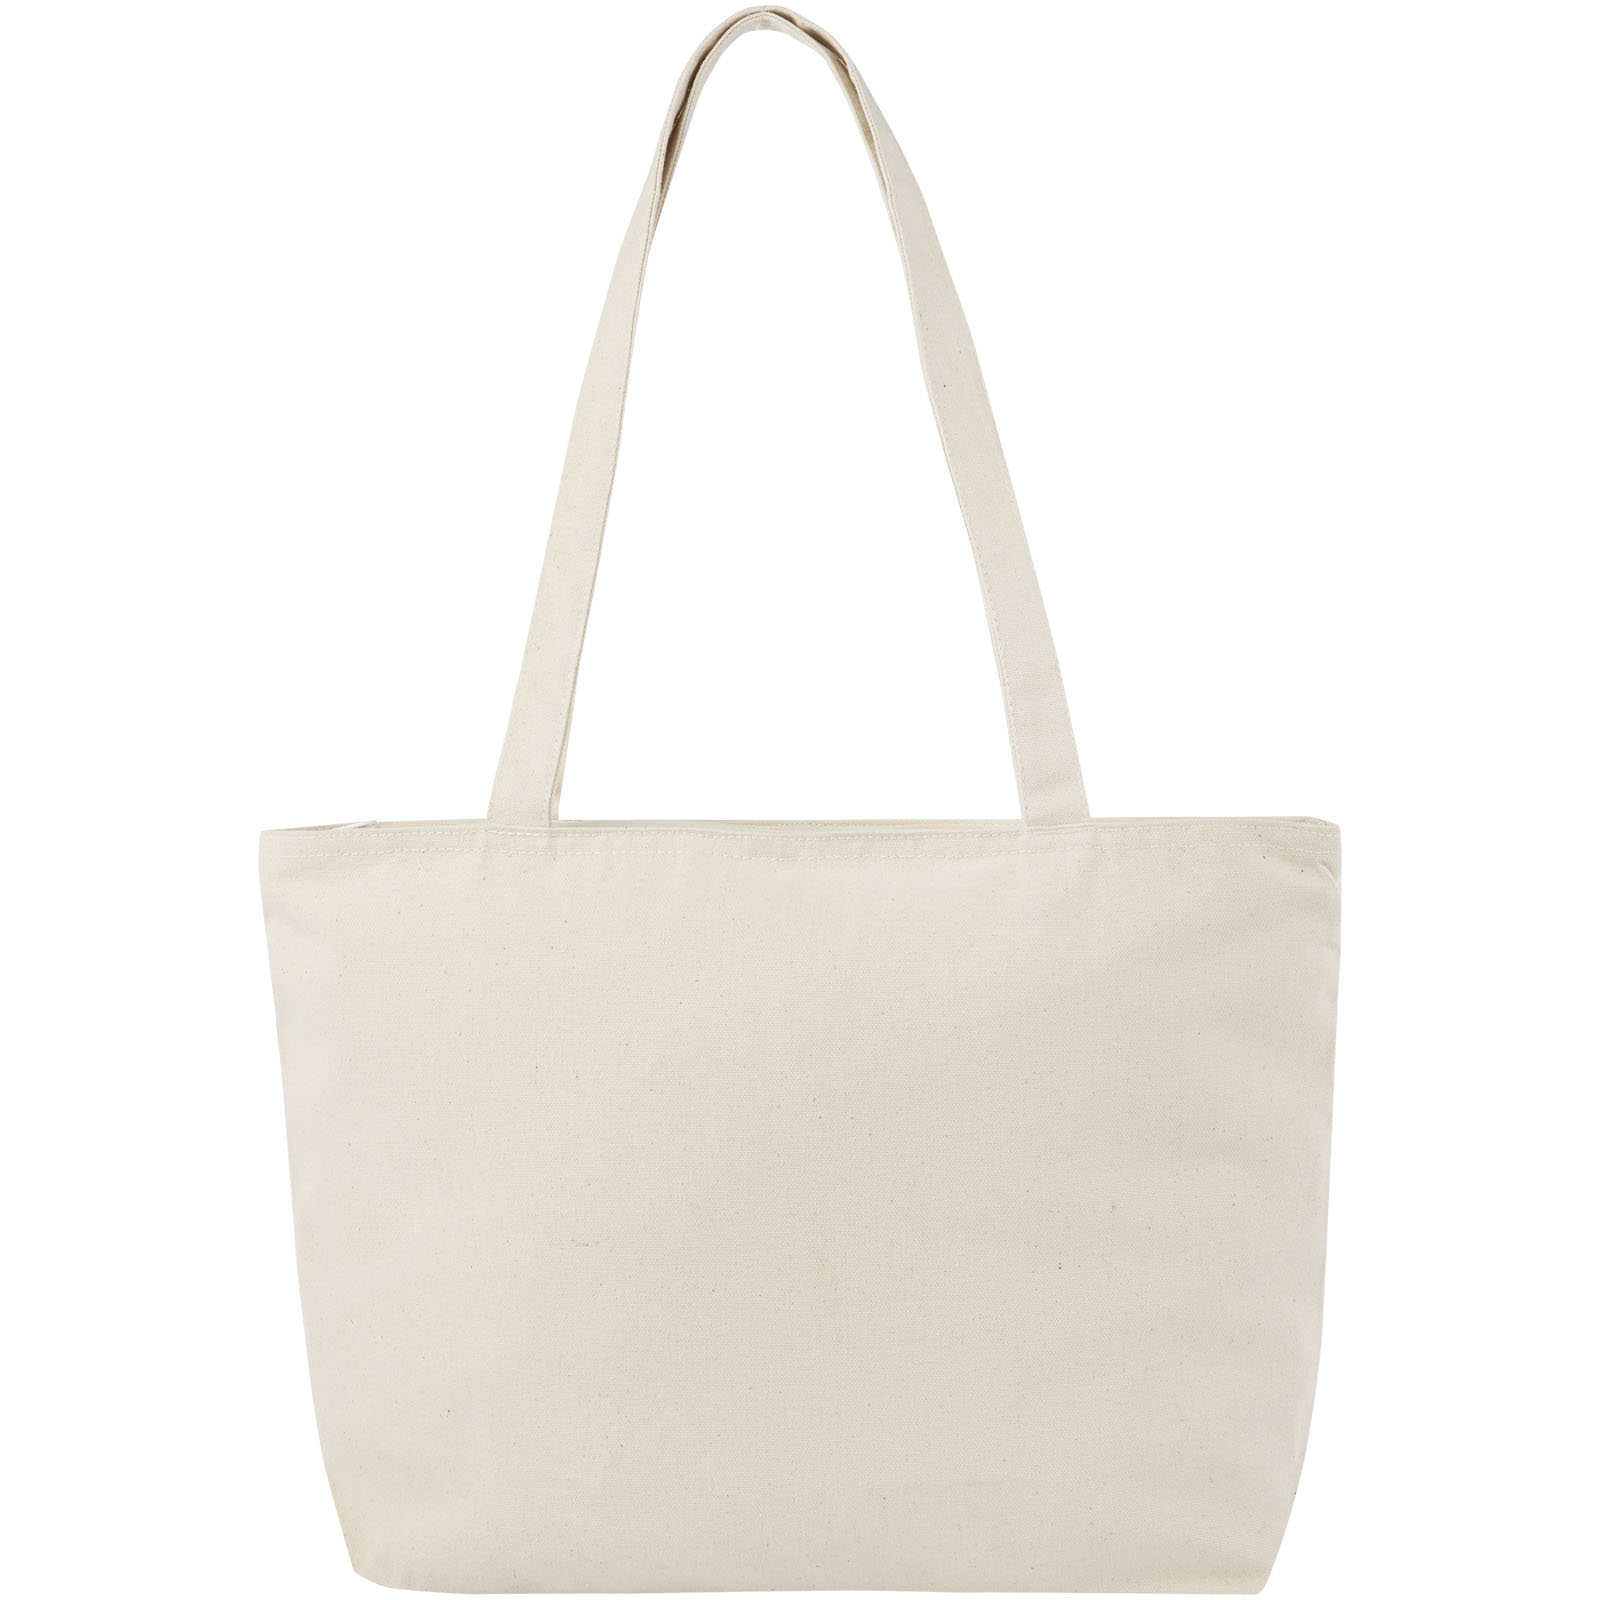 Advertising Cotton Bags - Ningbo 320 g/m² zippered cotton tote bag 15L - 1